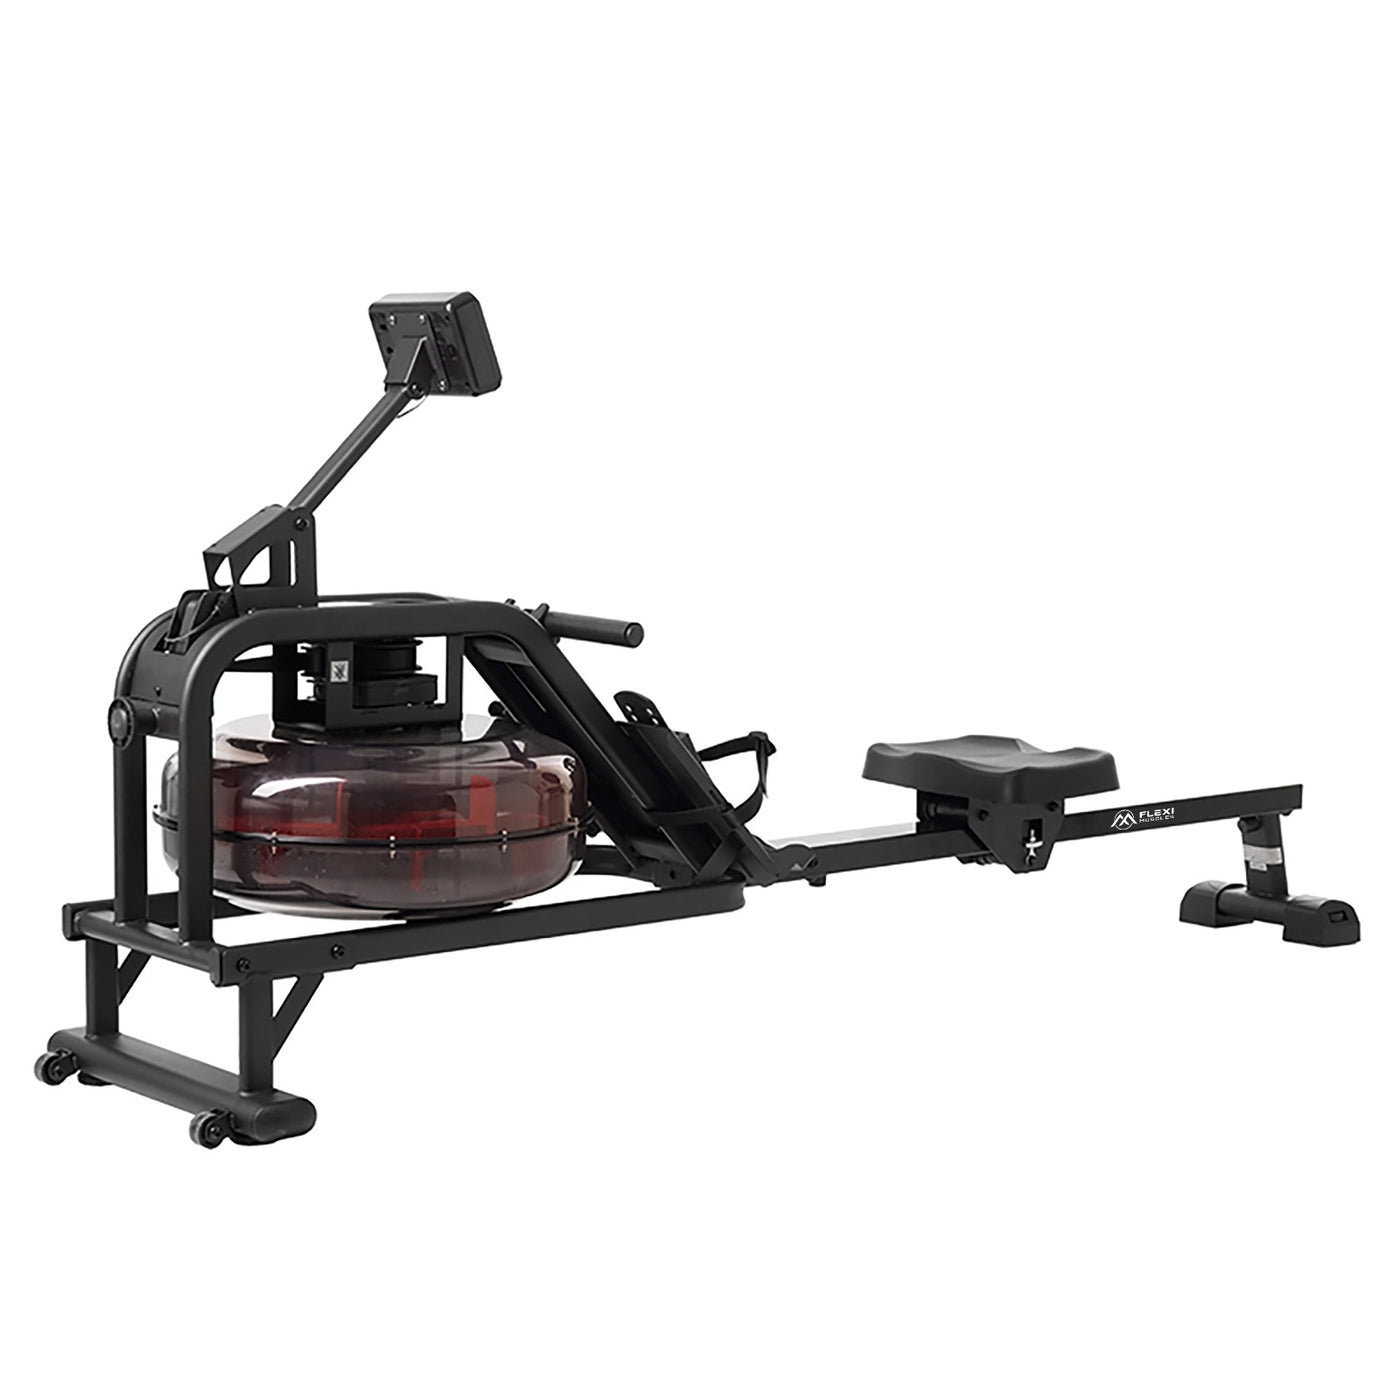 Flexi Muscles – Water Rowing Machine for Home Gym.